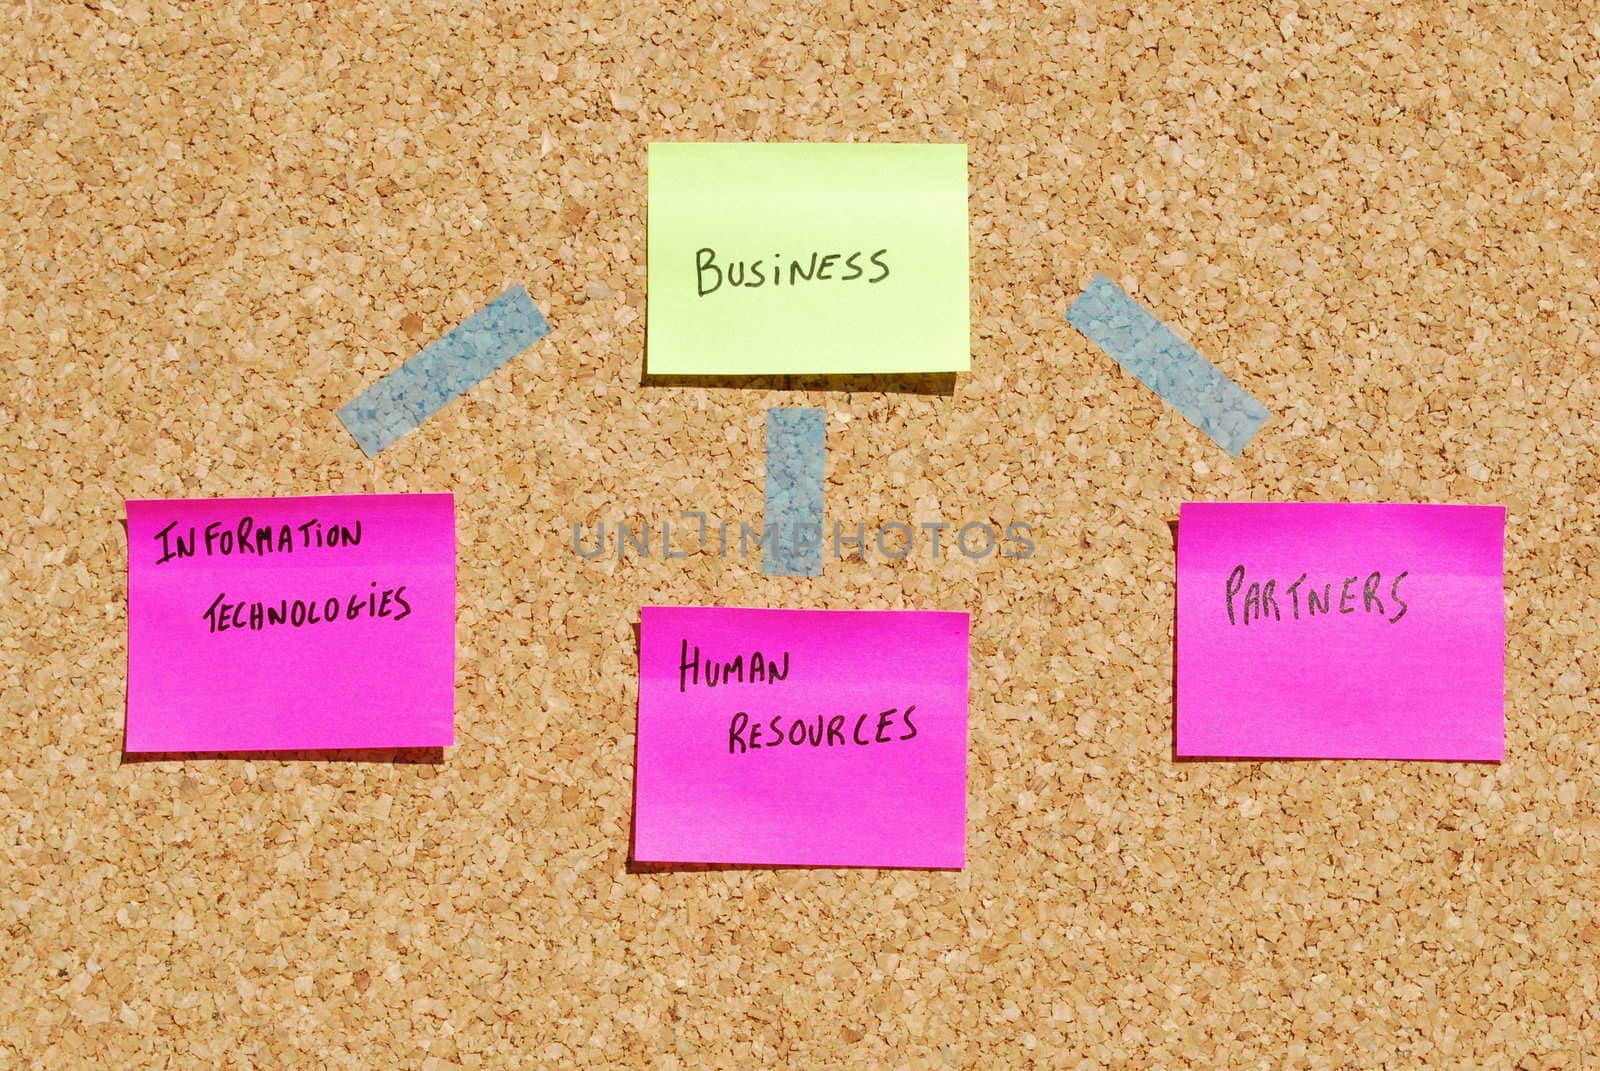 concept of a business organization on a cork board with post it notes